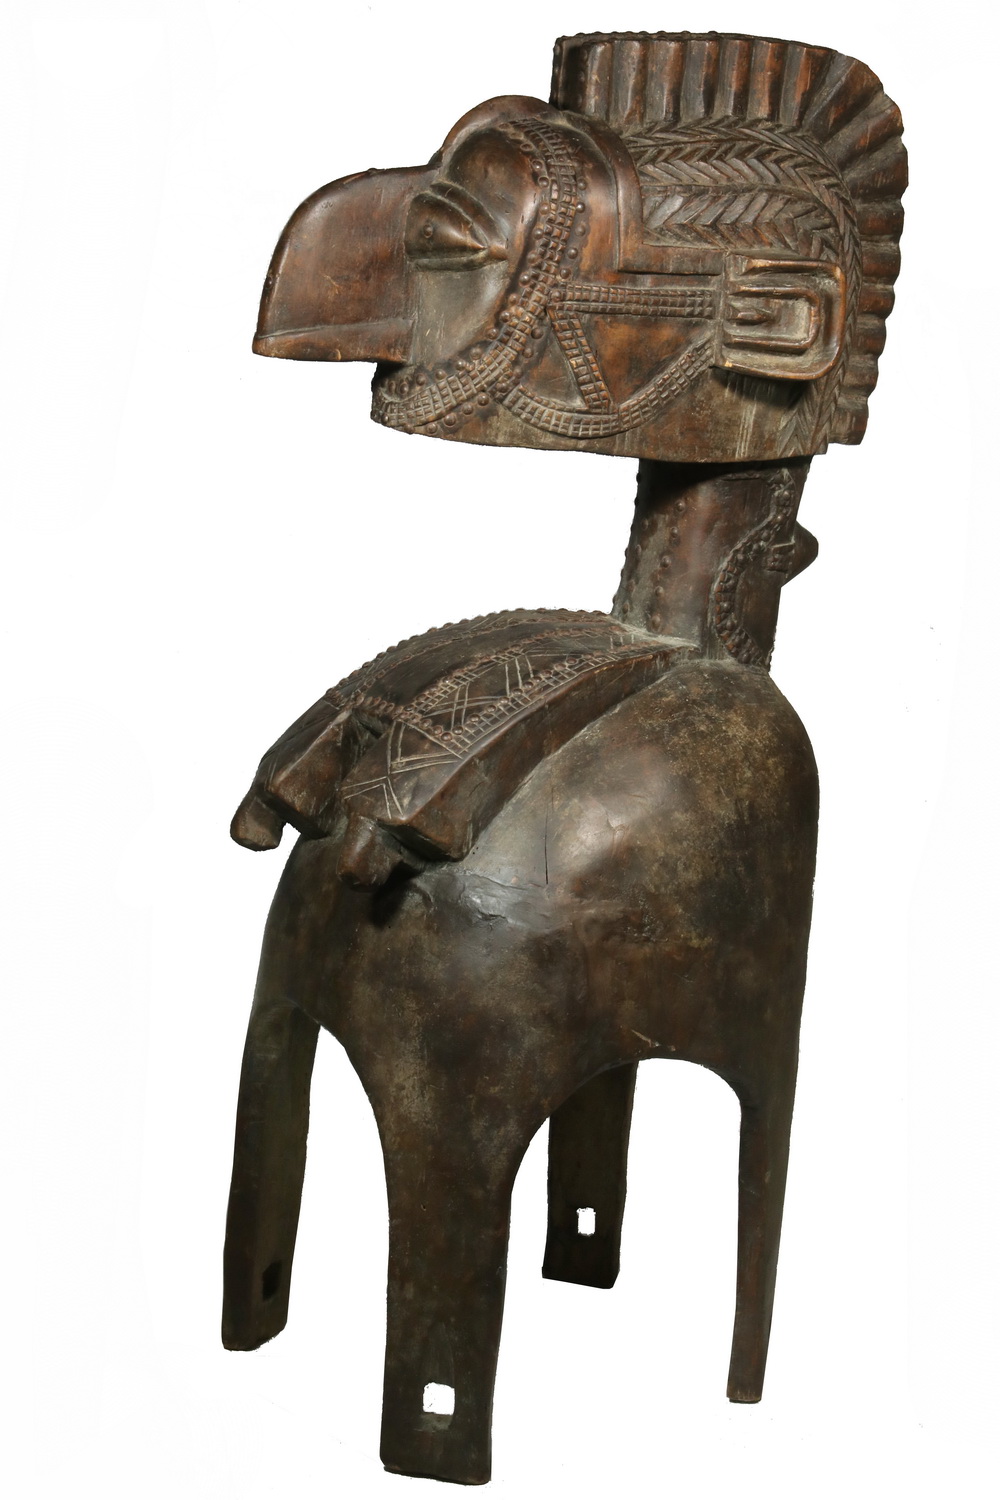 LARGE AFRICAN SCULPTURE Large and 30ca65